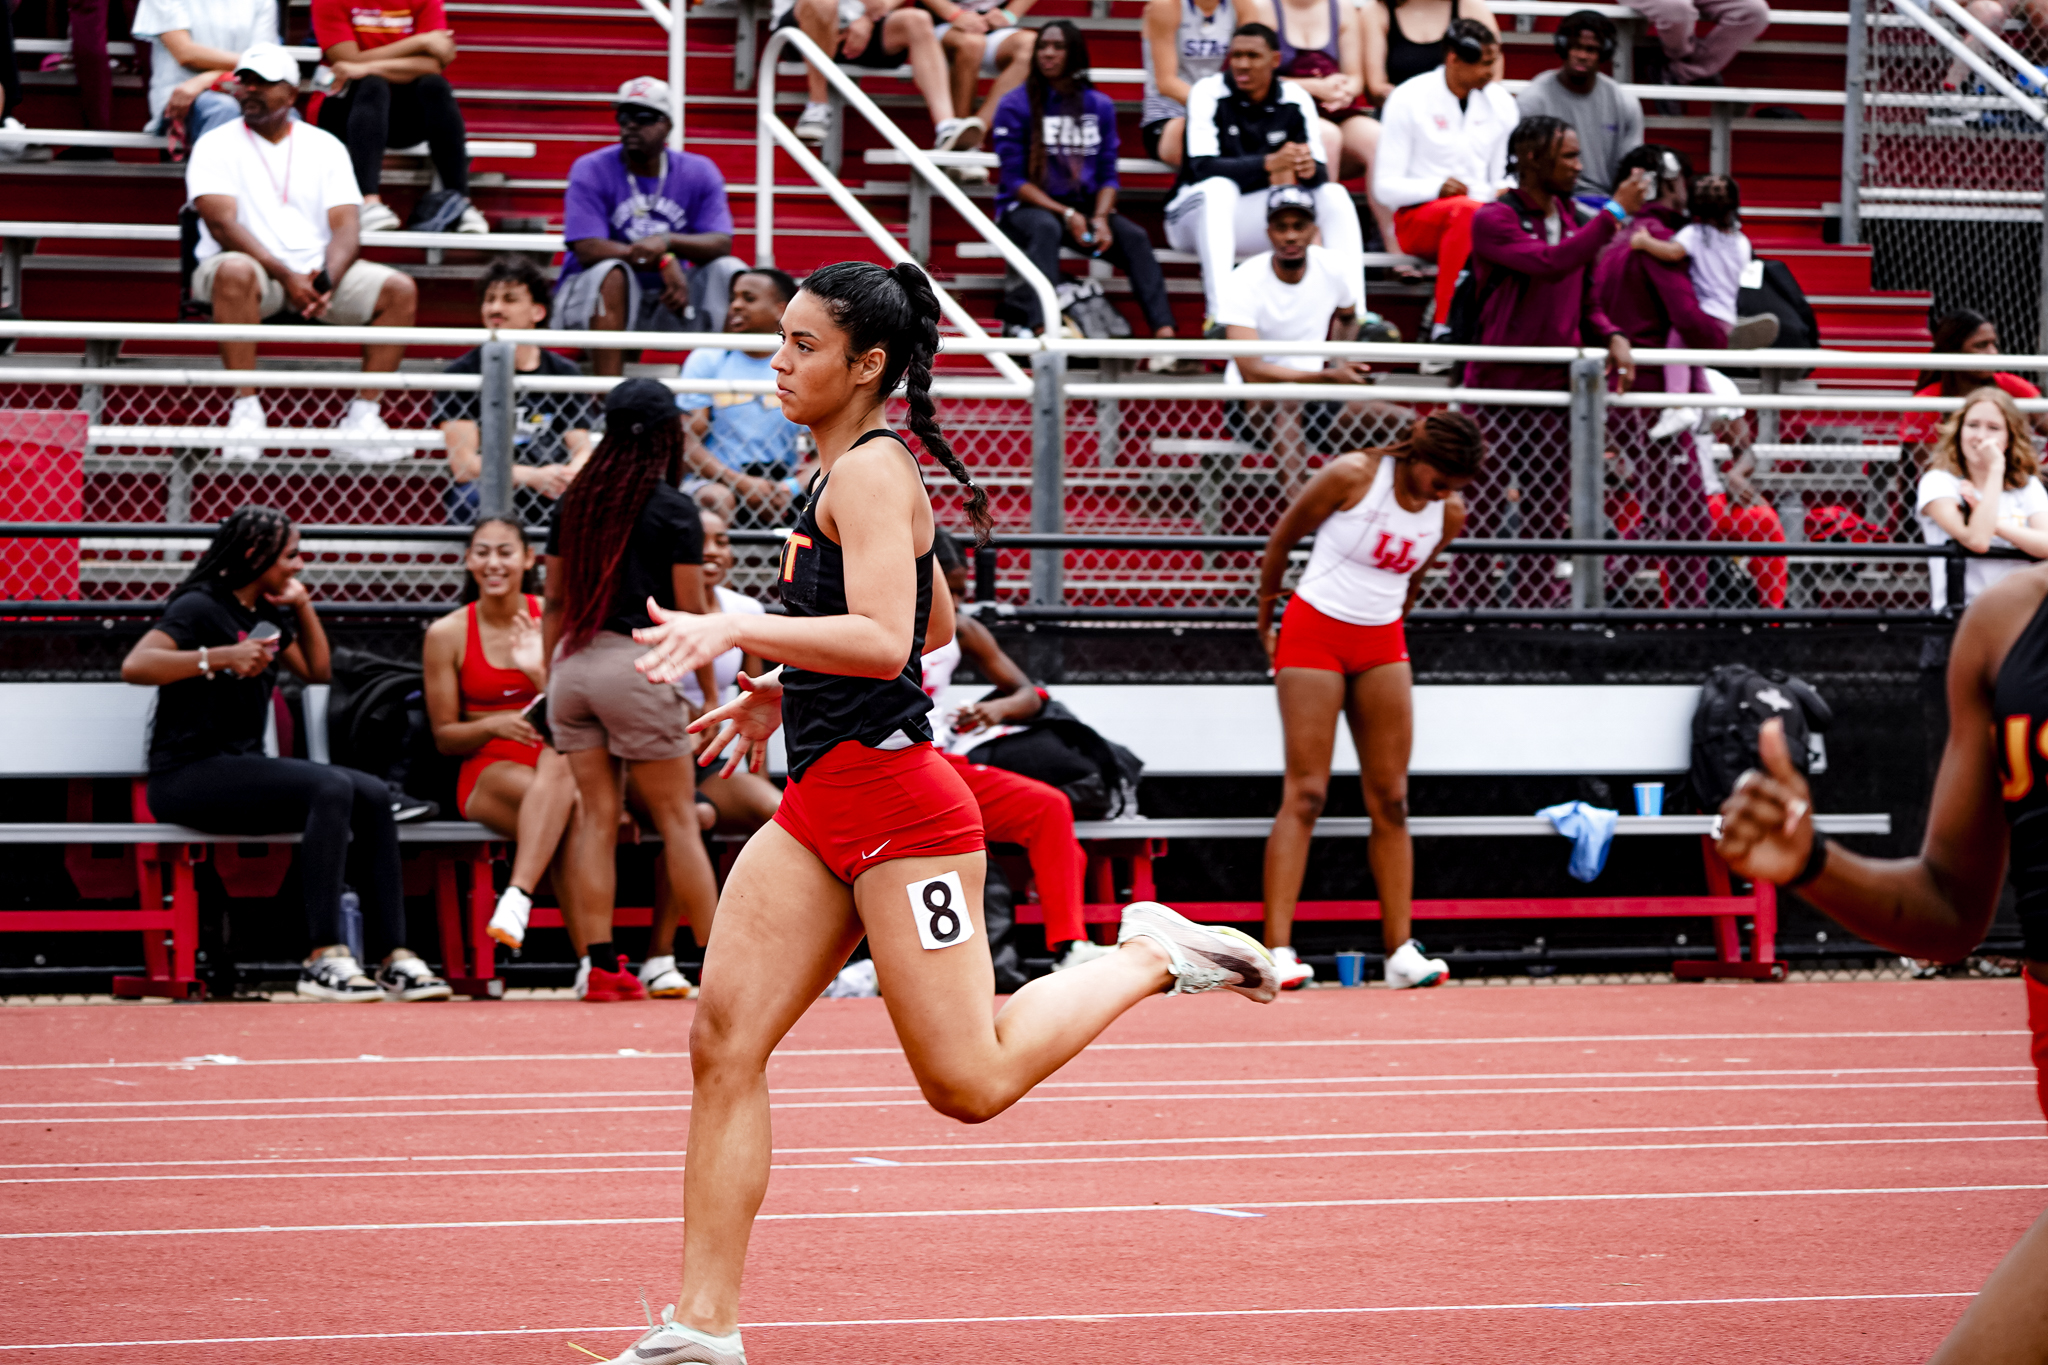 Women's Track Finishes 5th At SCAC Meet